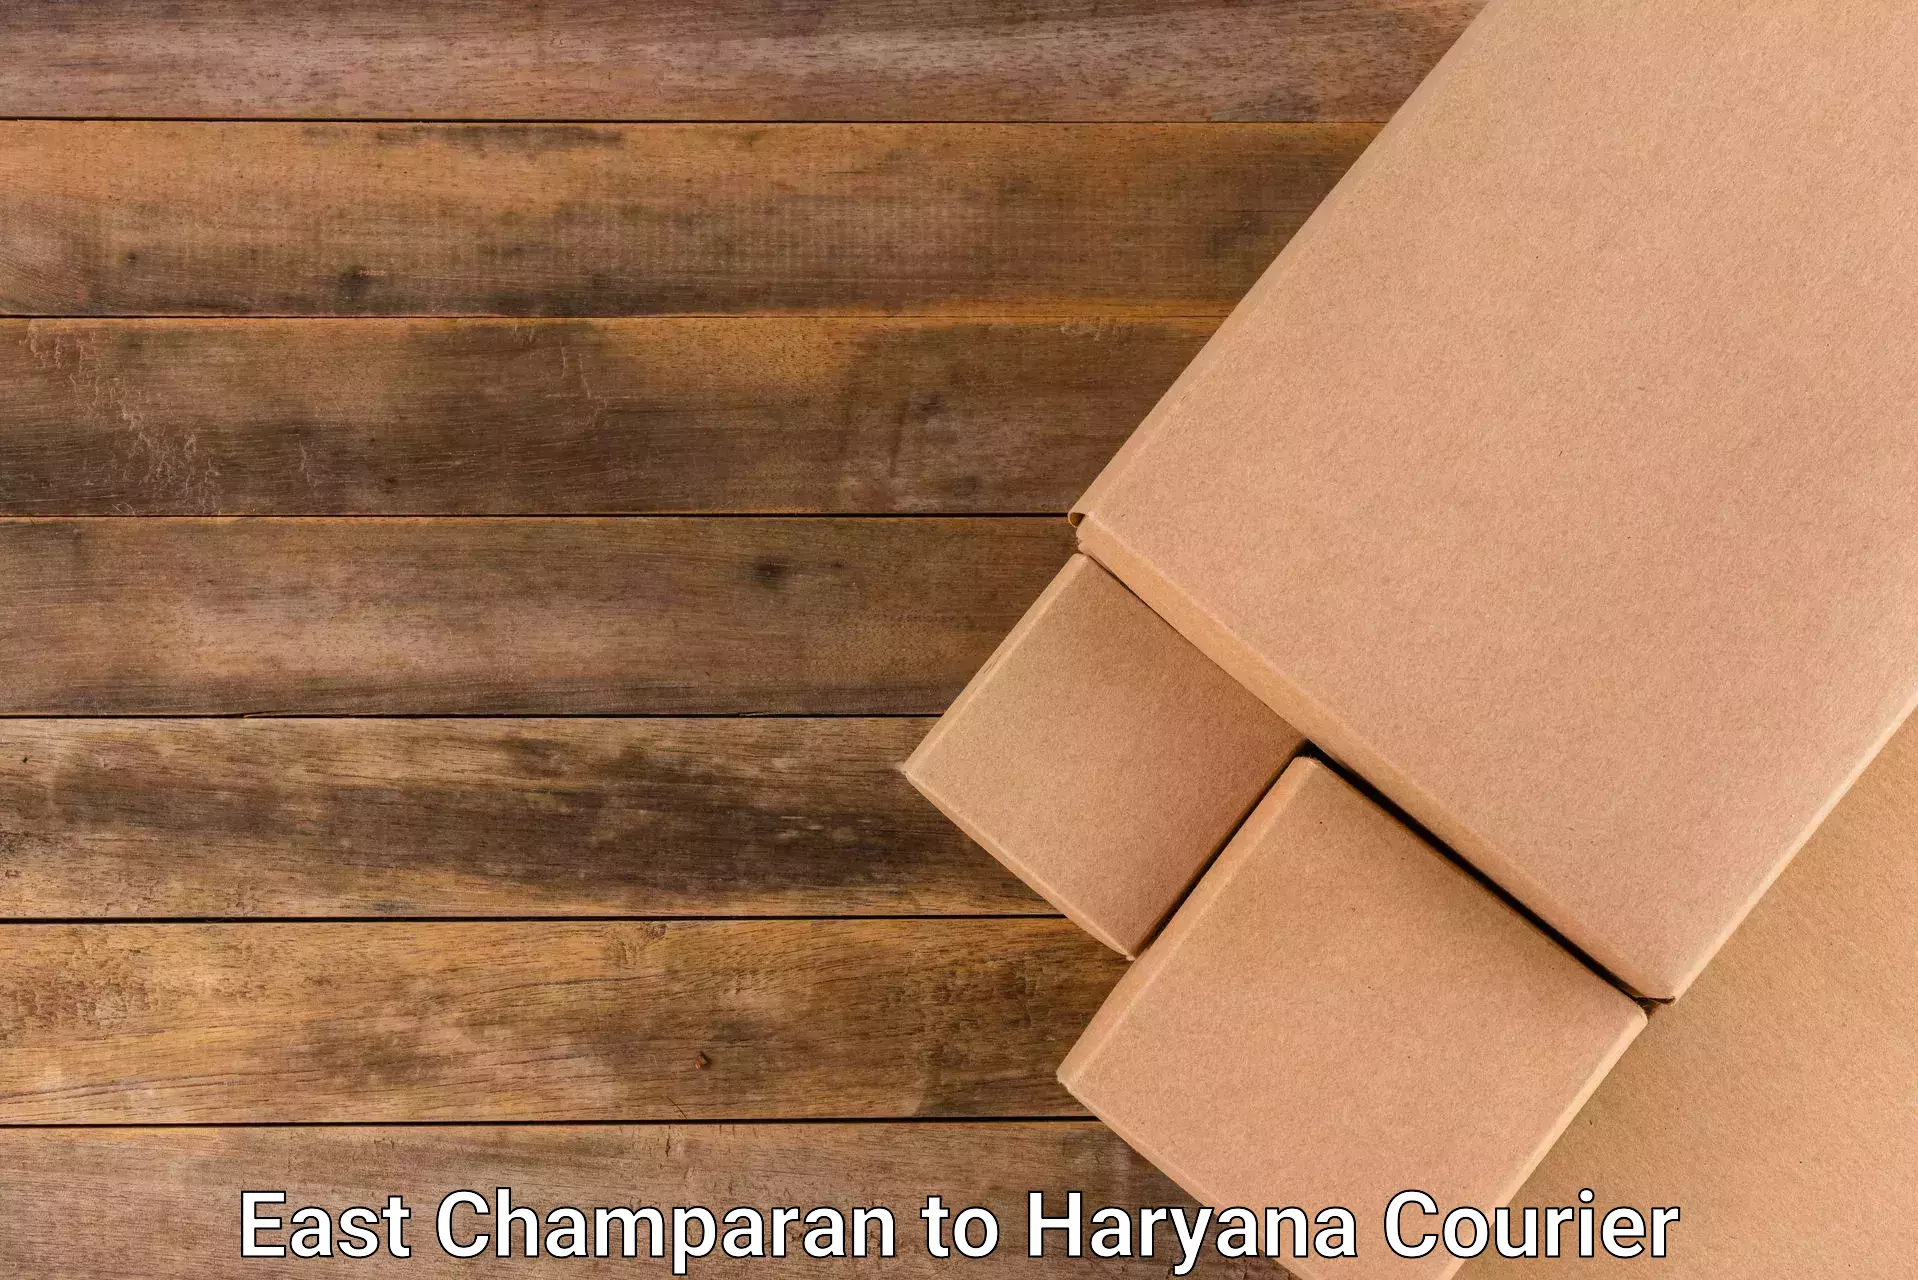 Express package handling East Champaran to Palwal